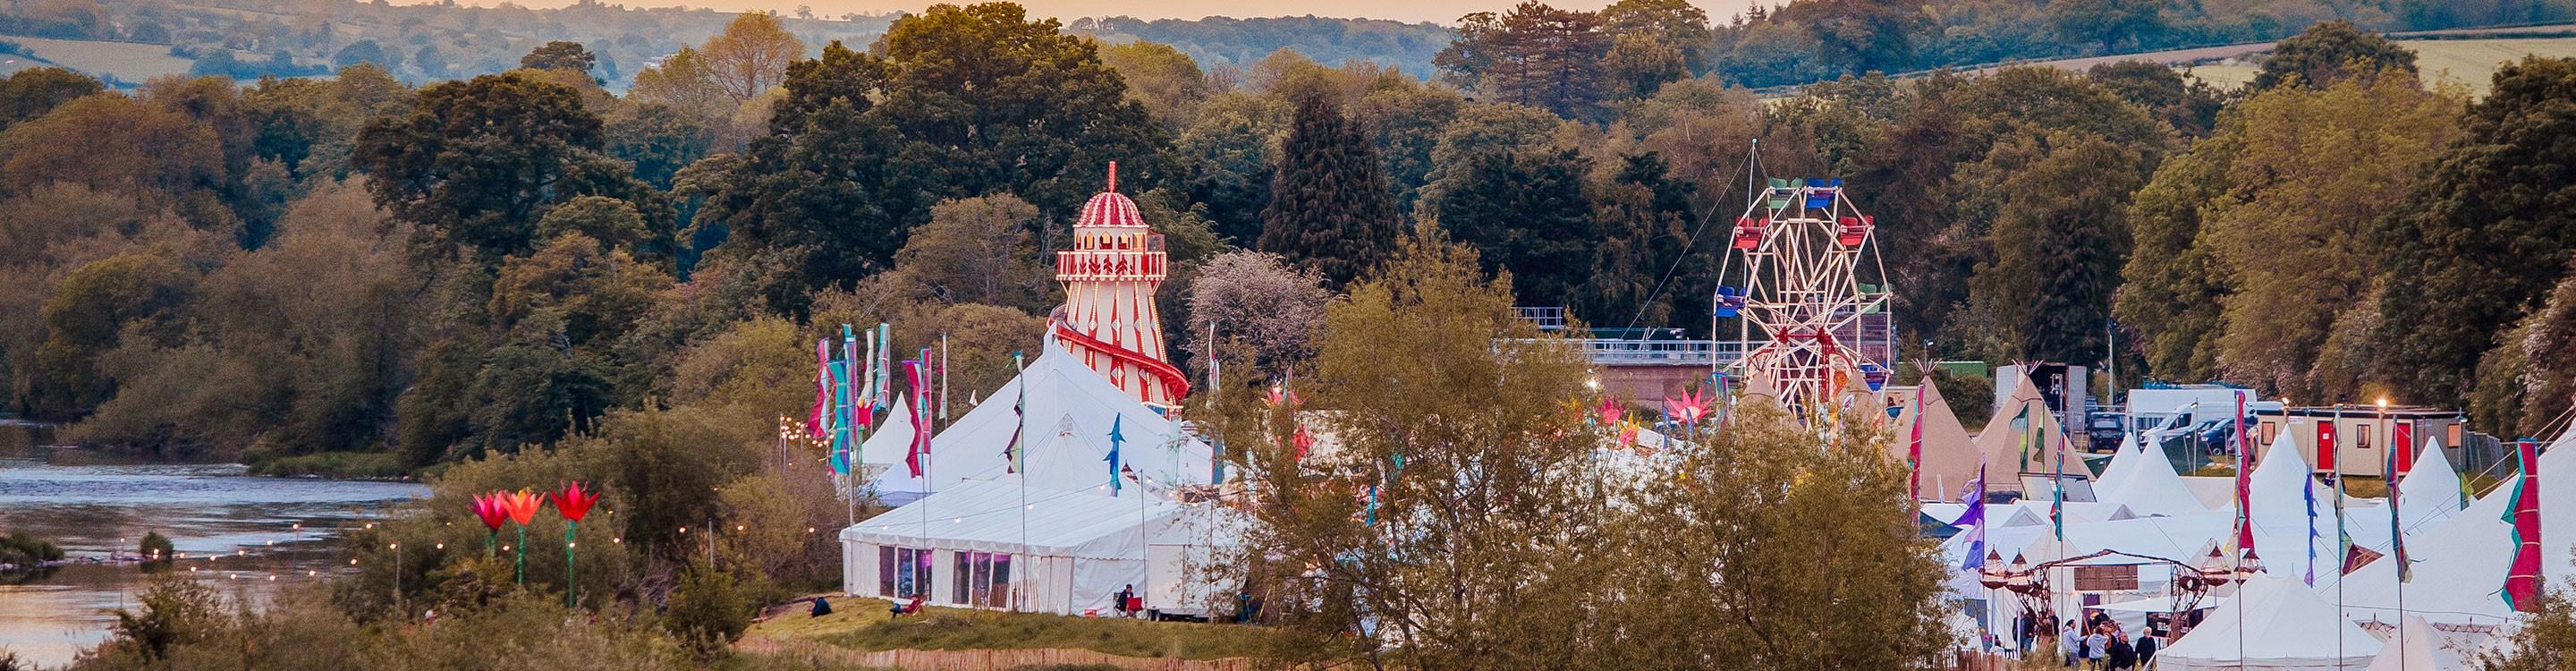 Festival marquees and rides overlooking the River Wye